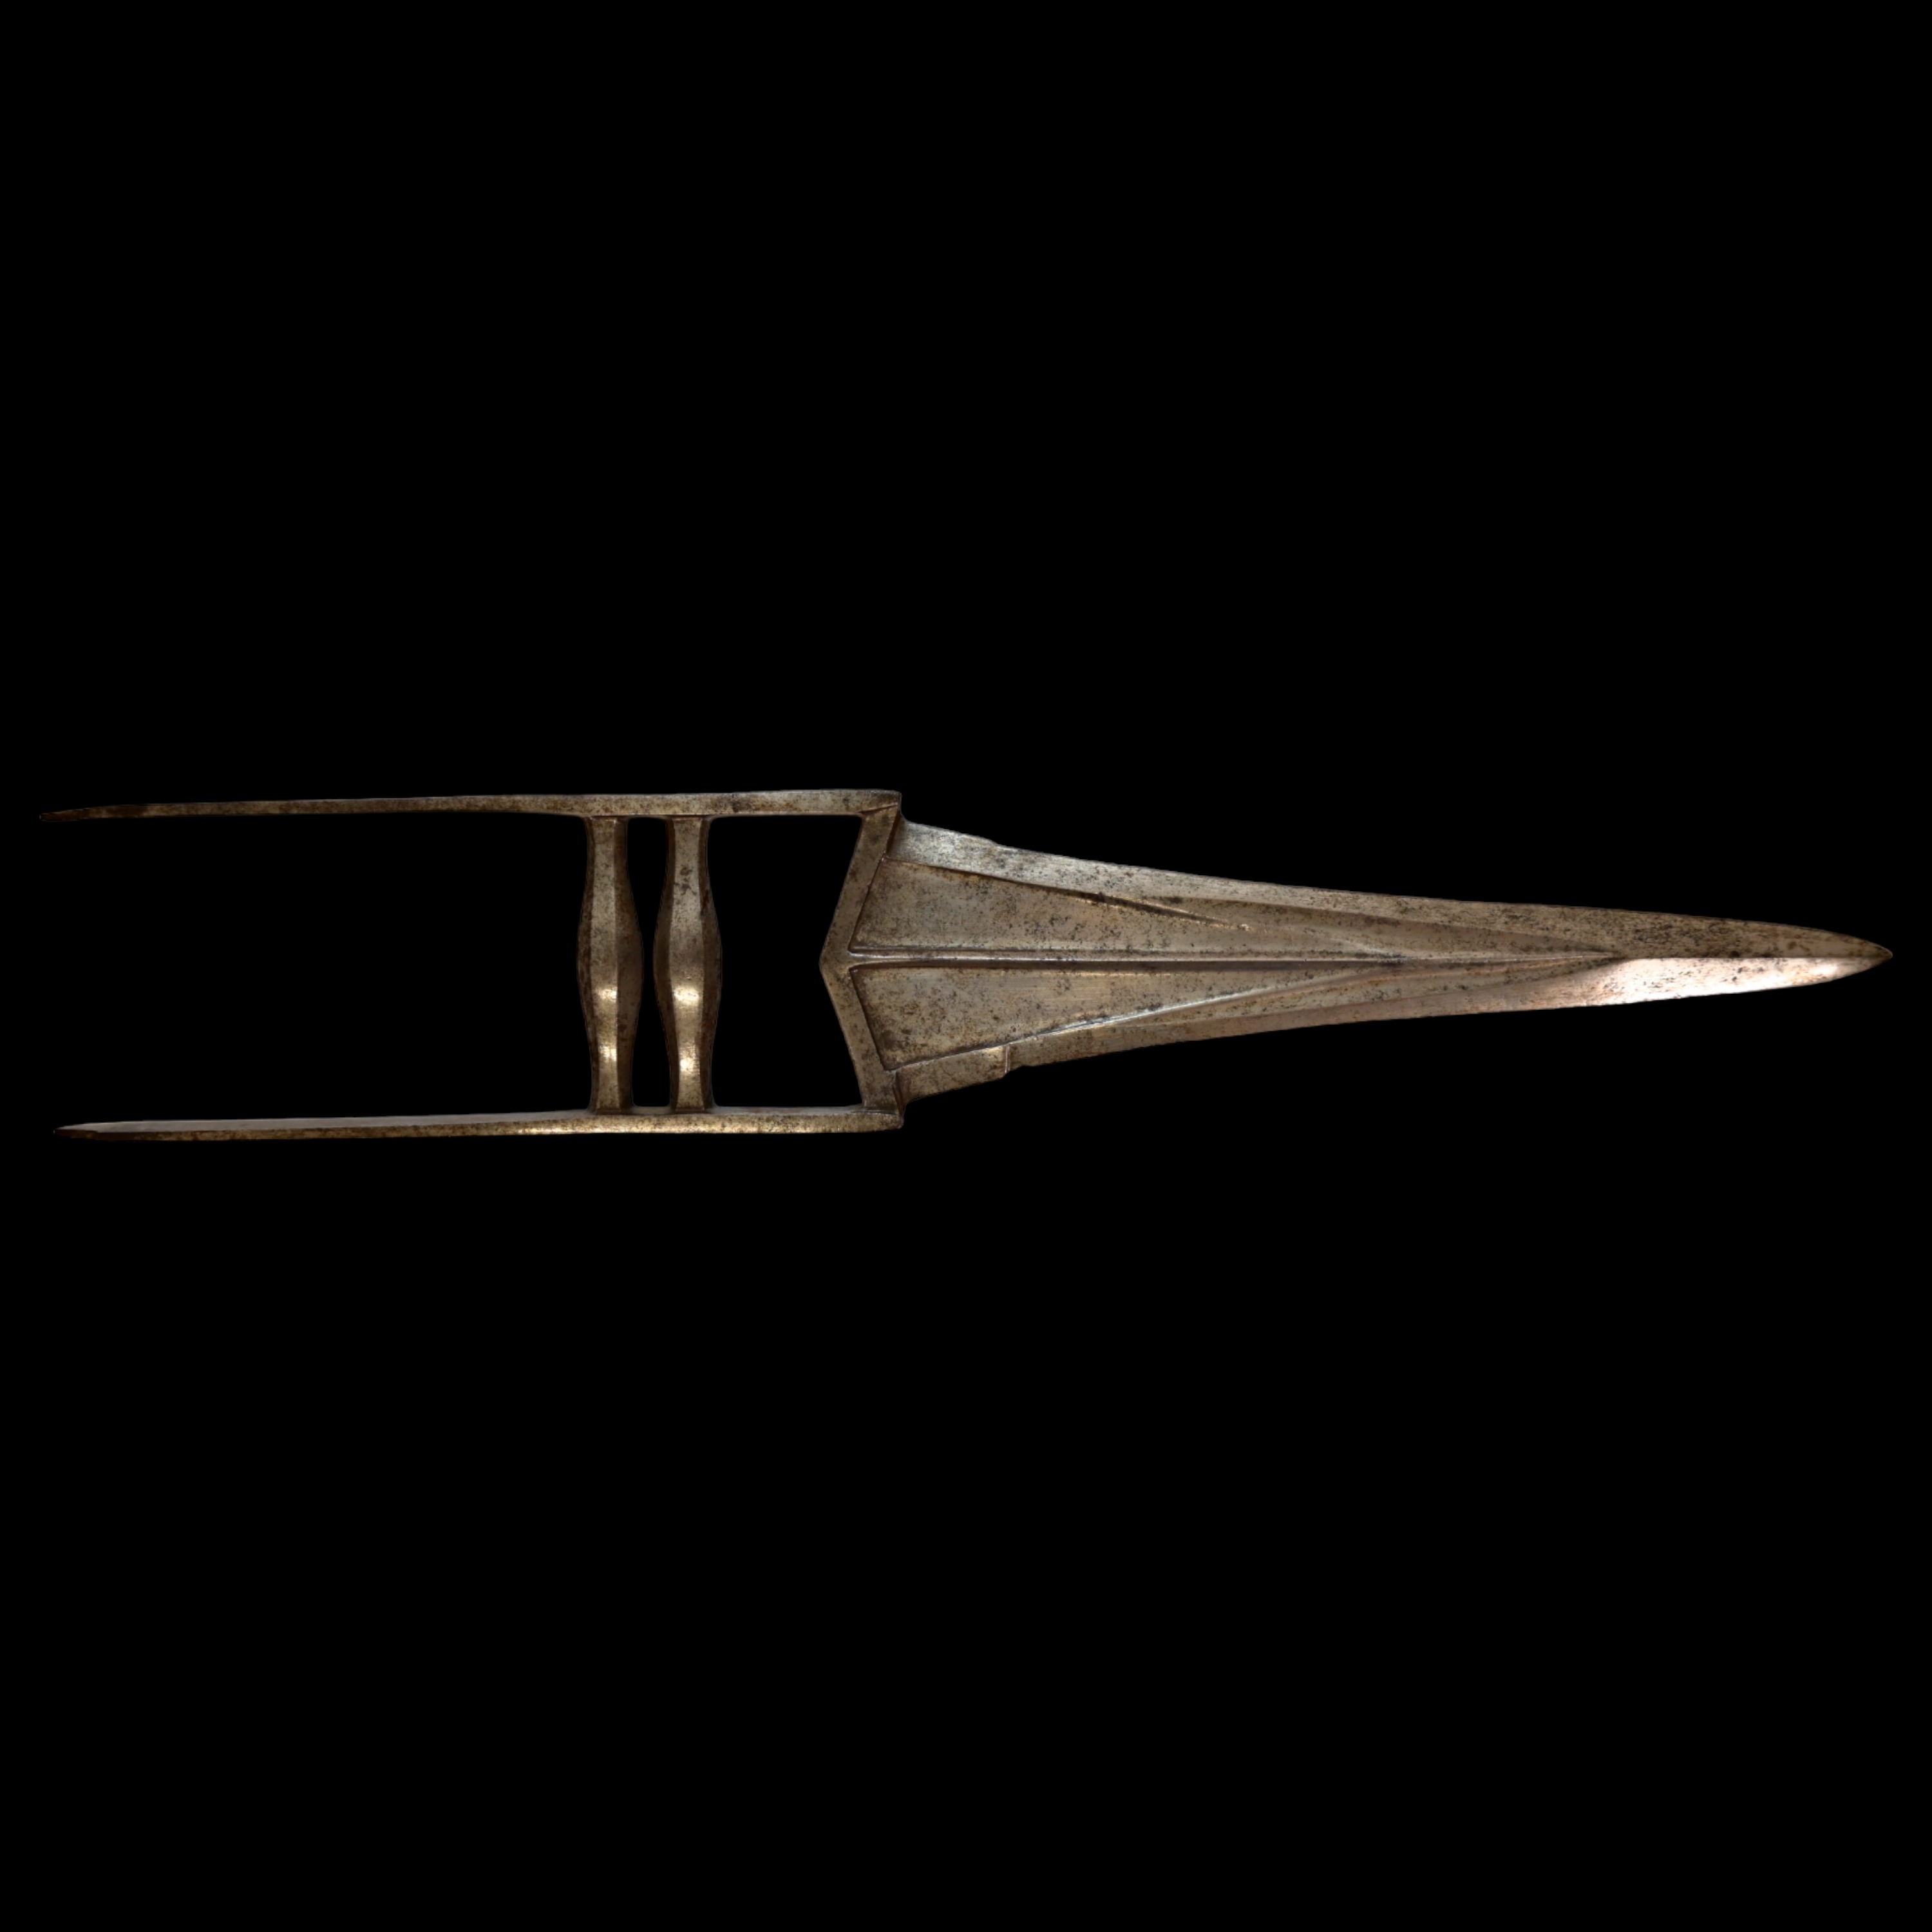 Old Indian Katar dagger, South India. 18 century - Image 2 of 7